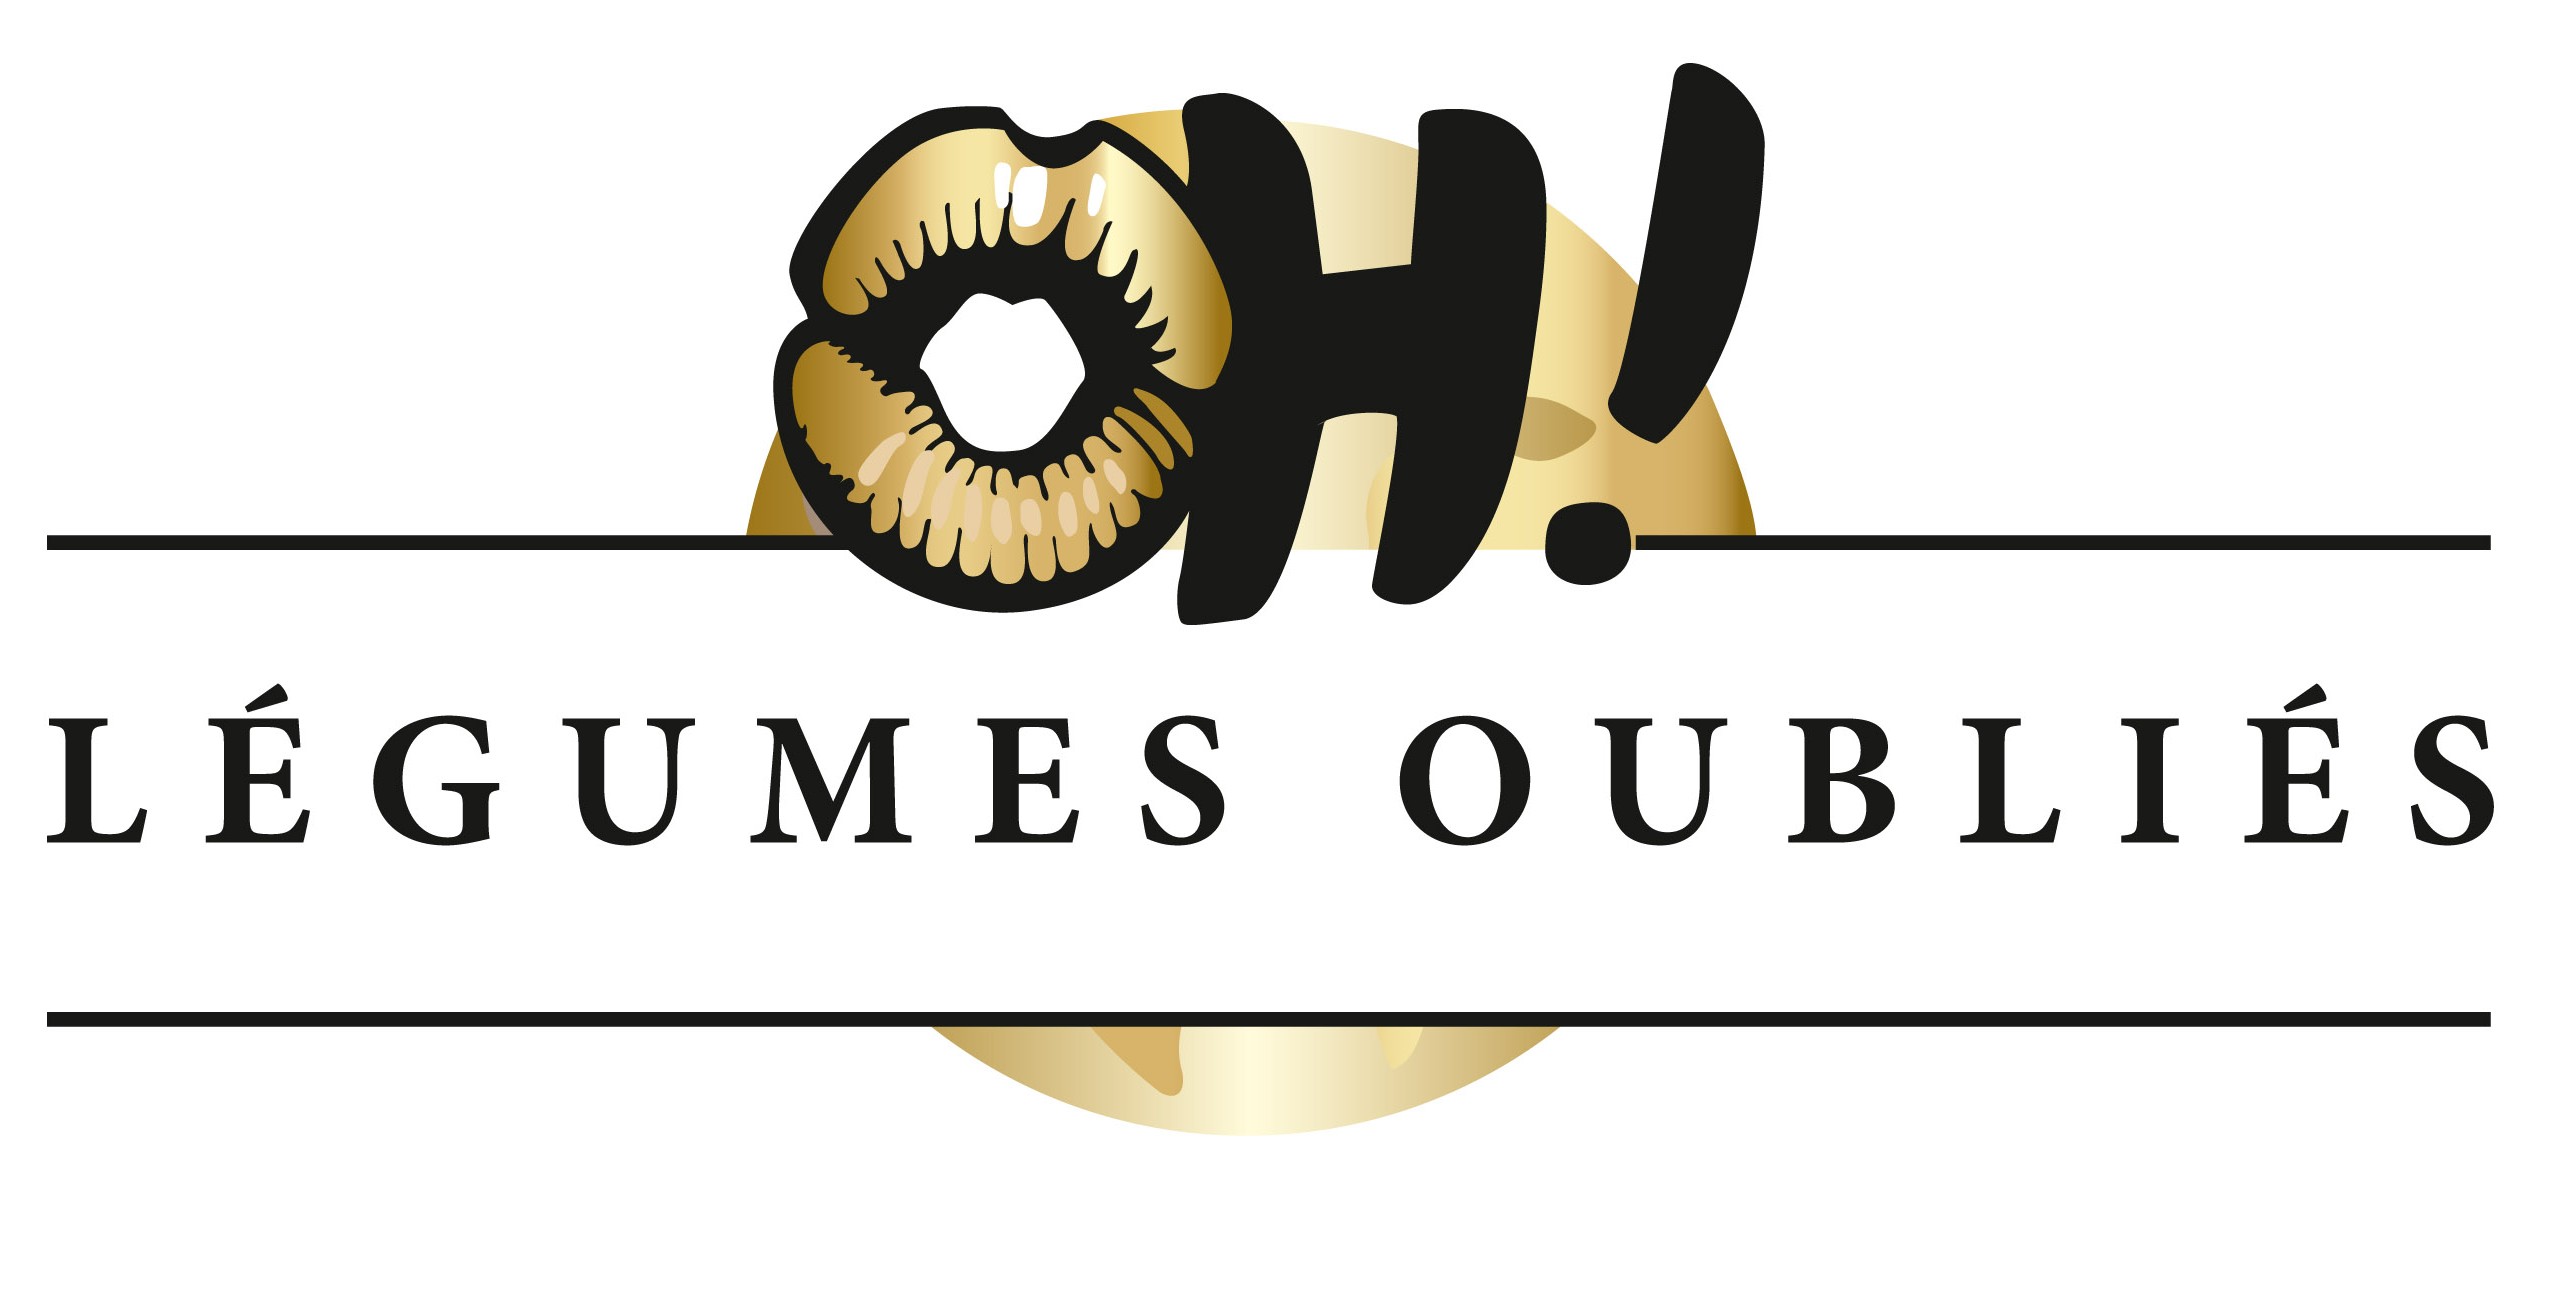 LOGO-OH-LEGUMES-OUBLIÉS VECT